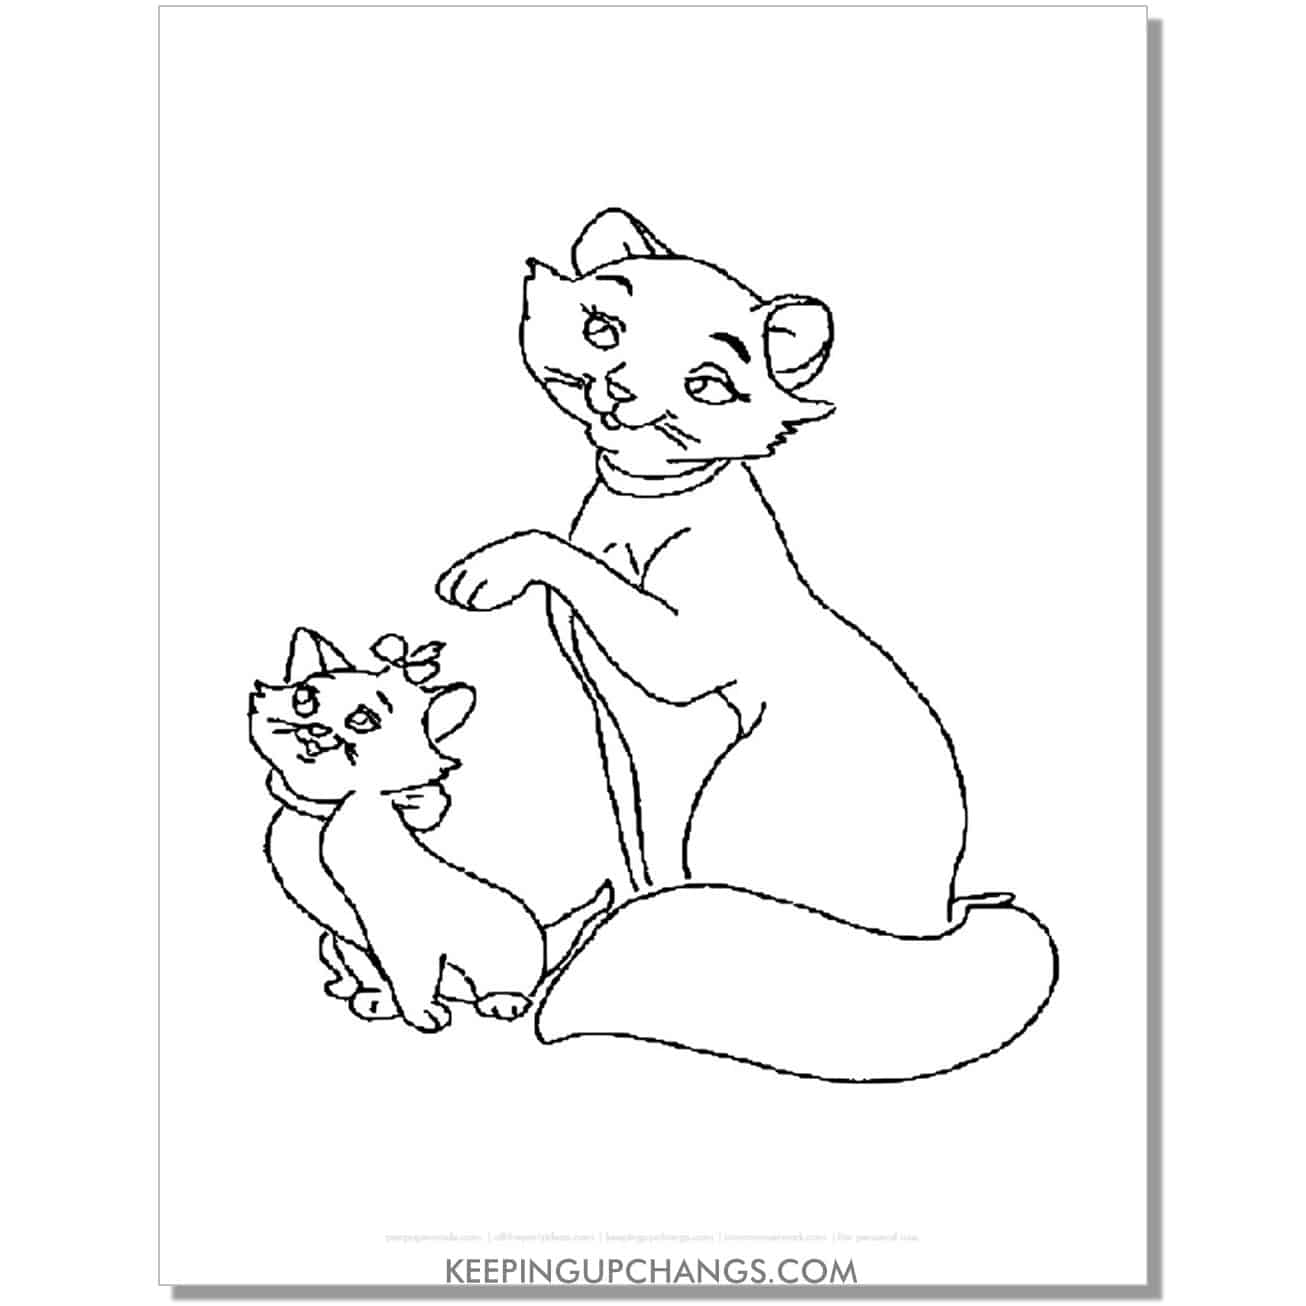 marie and duchess aristocats coloring page, sheet.